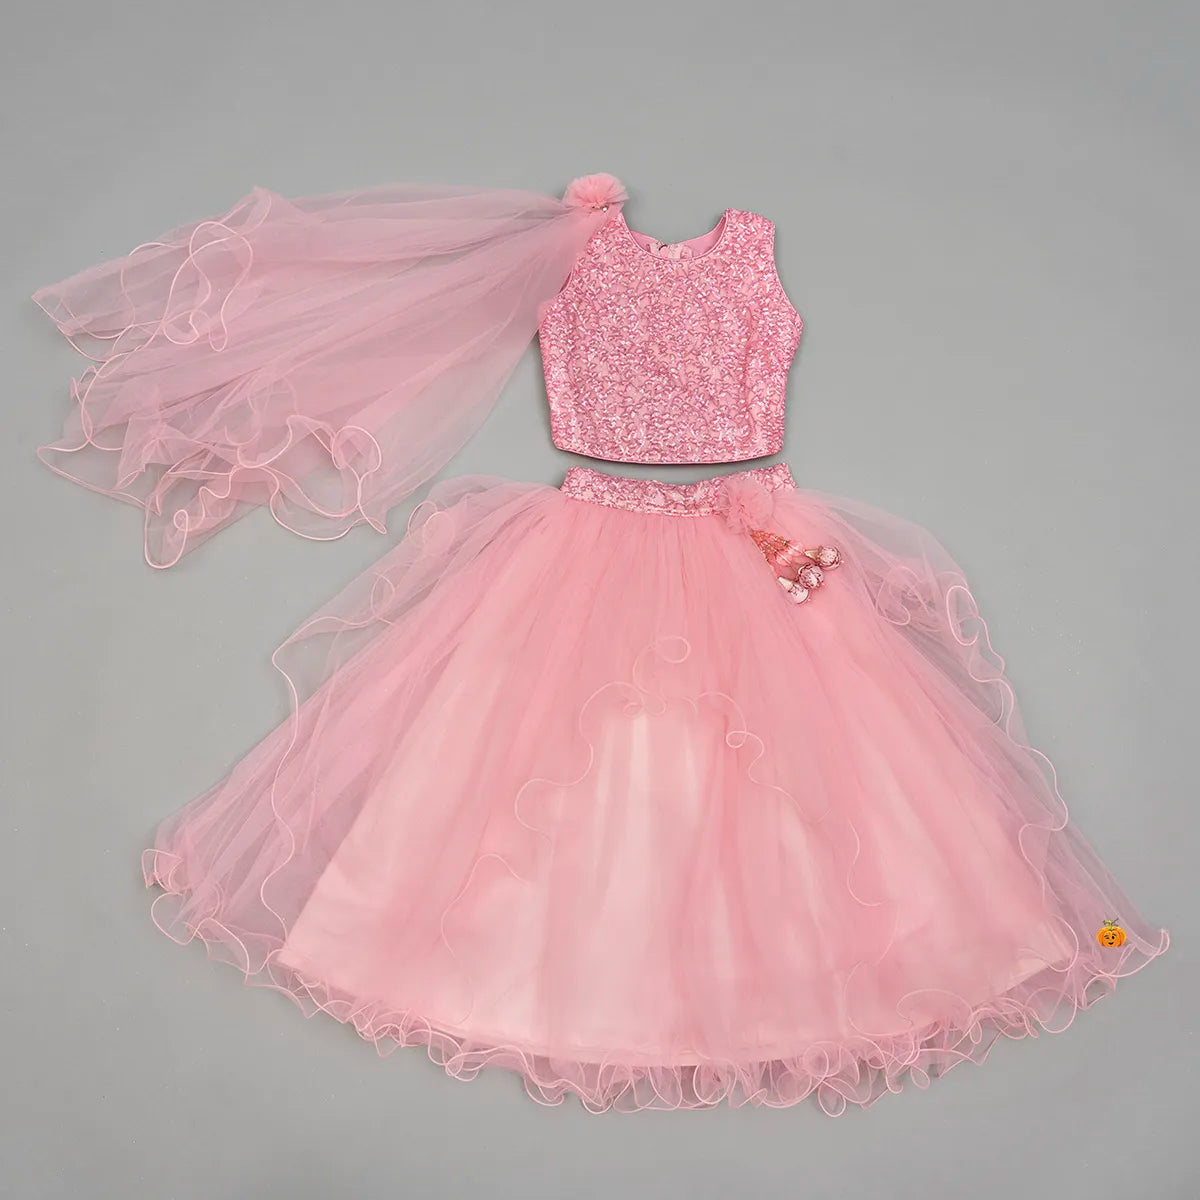 Stylish Lehenga and Choli Dresses for your Baby Girl - Baby Couture India